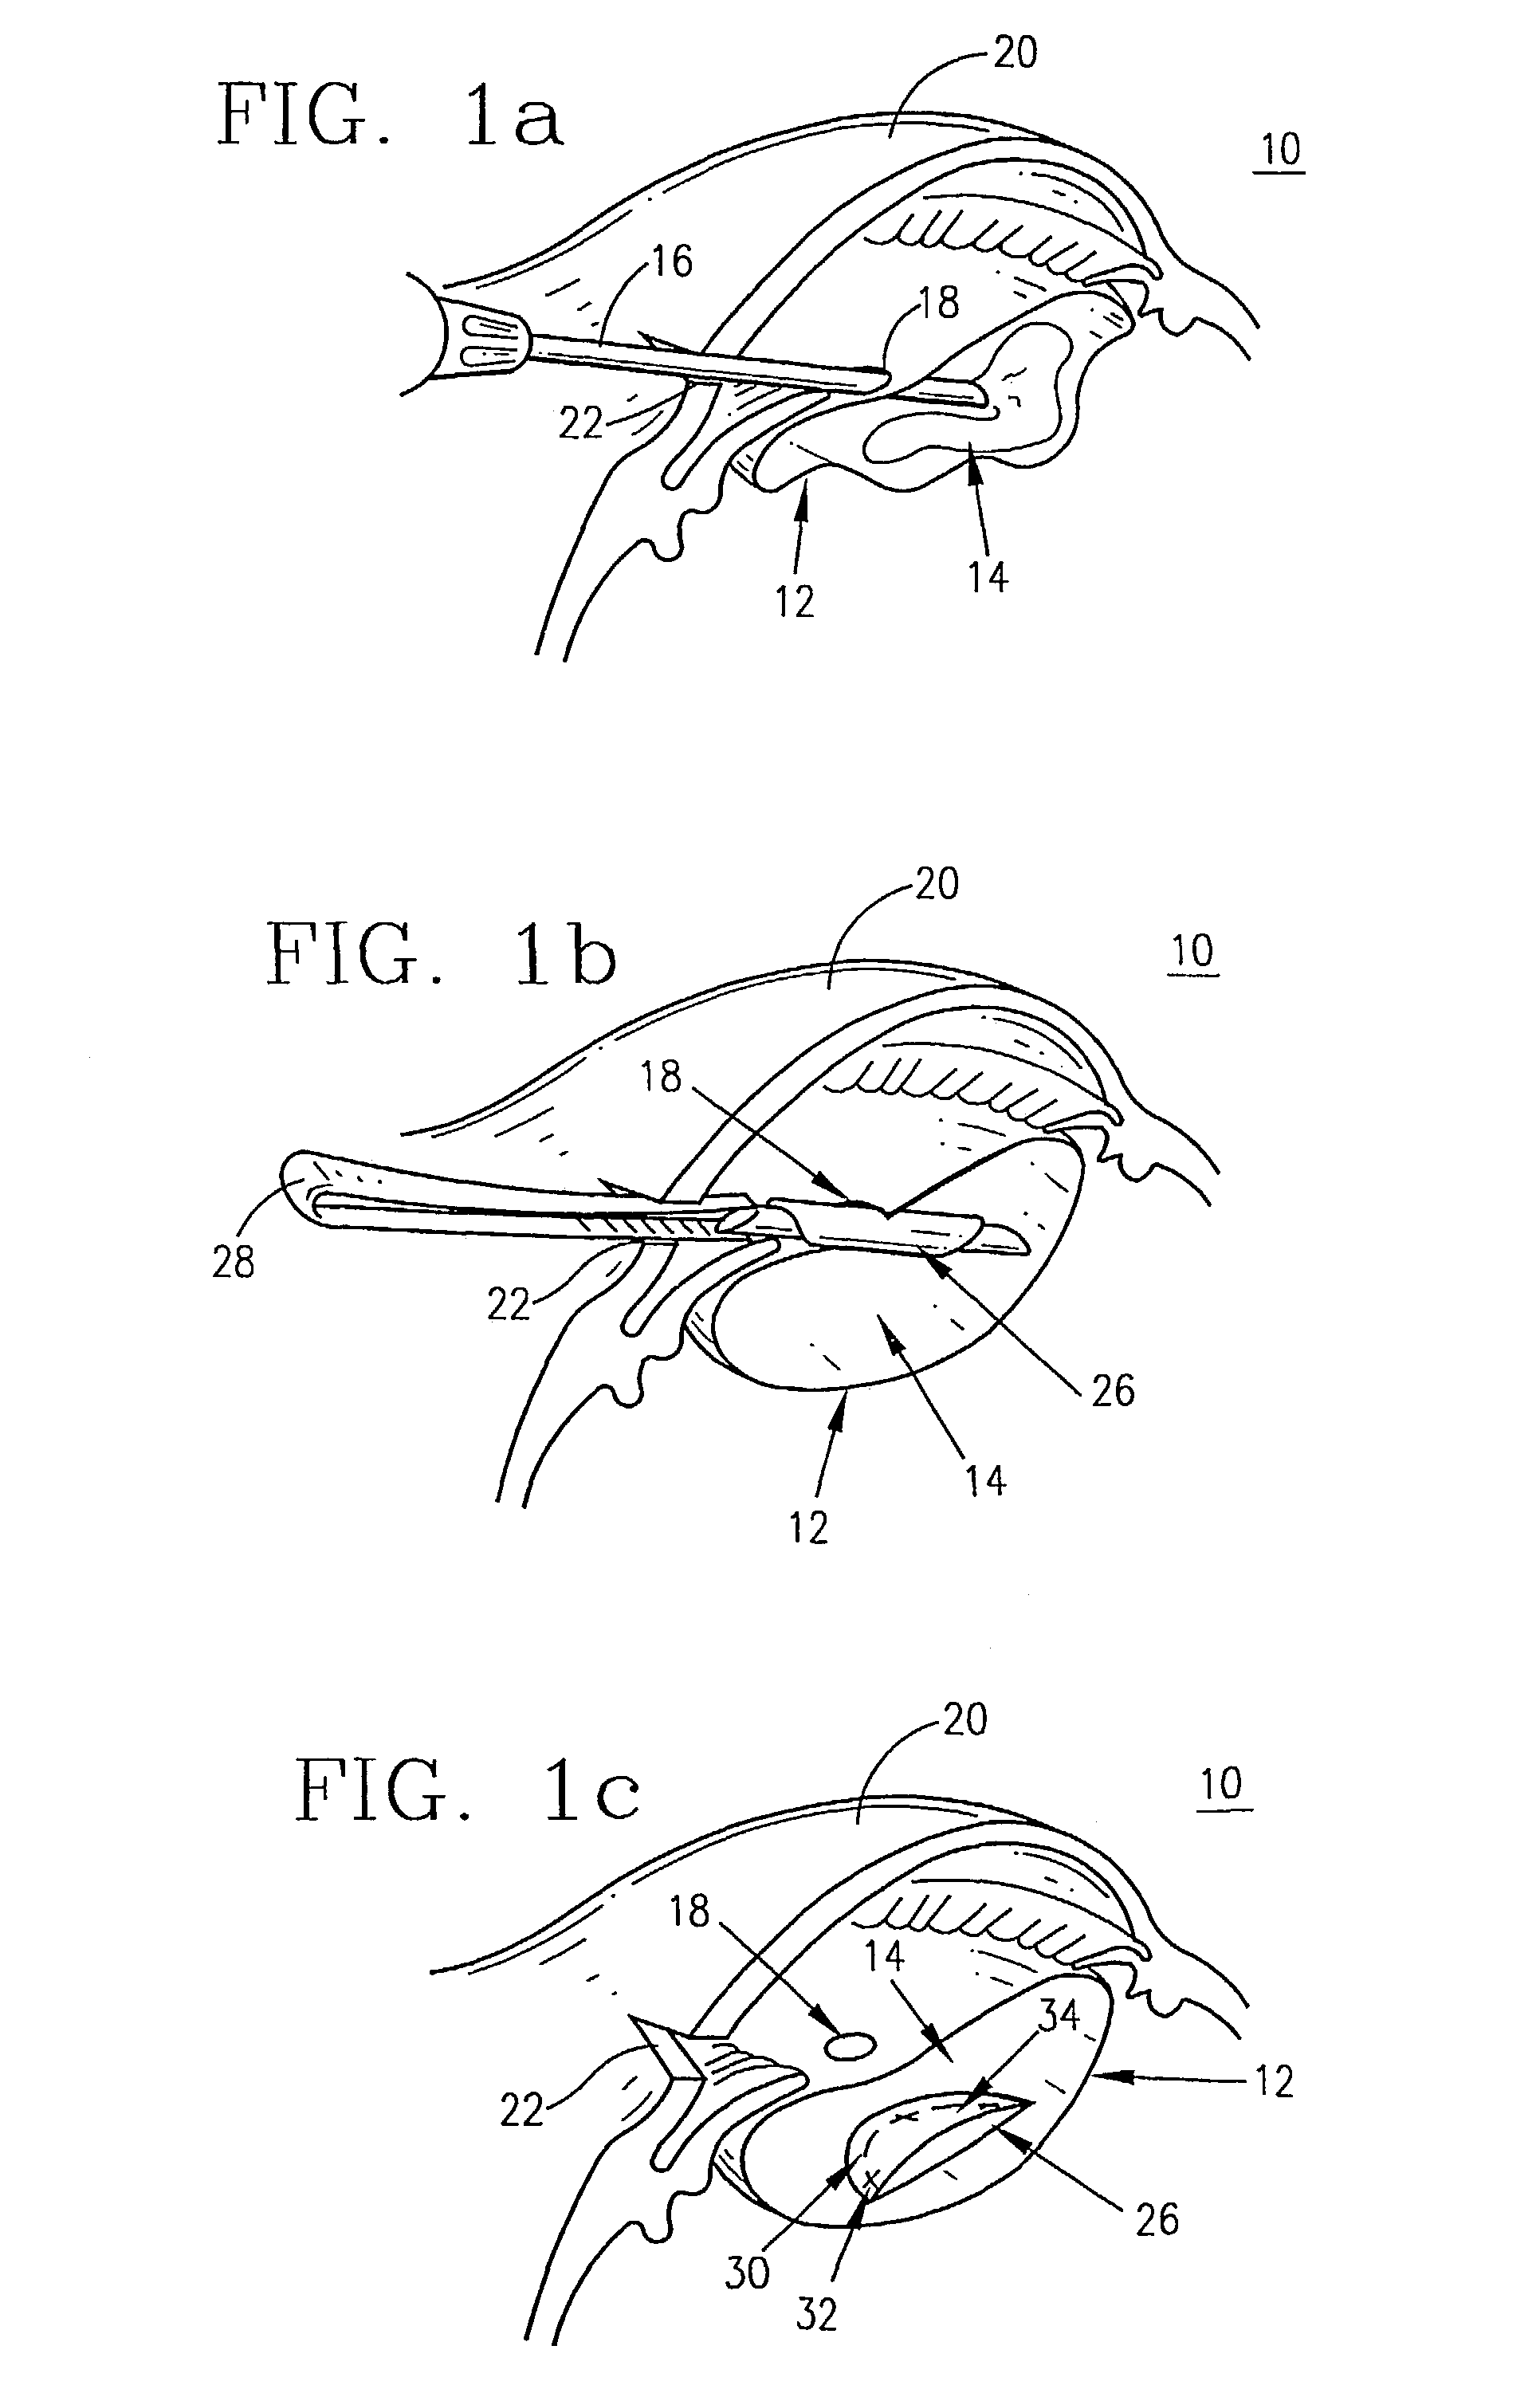 Supplementary endo-capsular lens and method of implantation